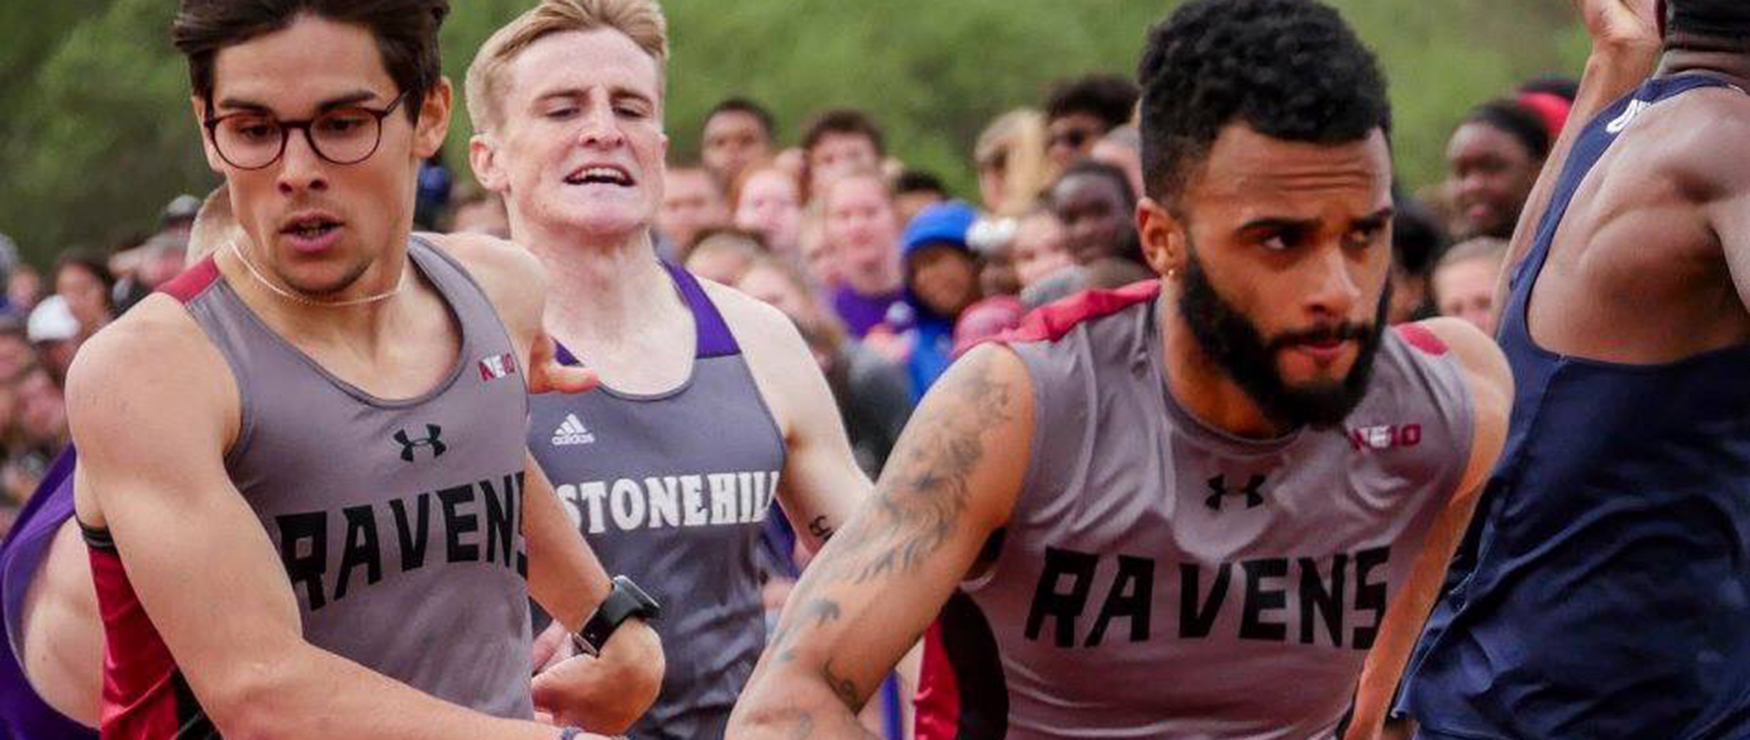 Minors Leads Men’s Track & Field Pair at NCAA Championships, Advances to 800m Final